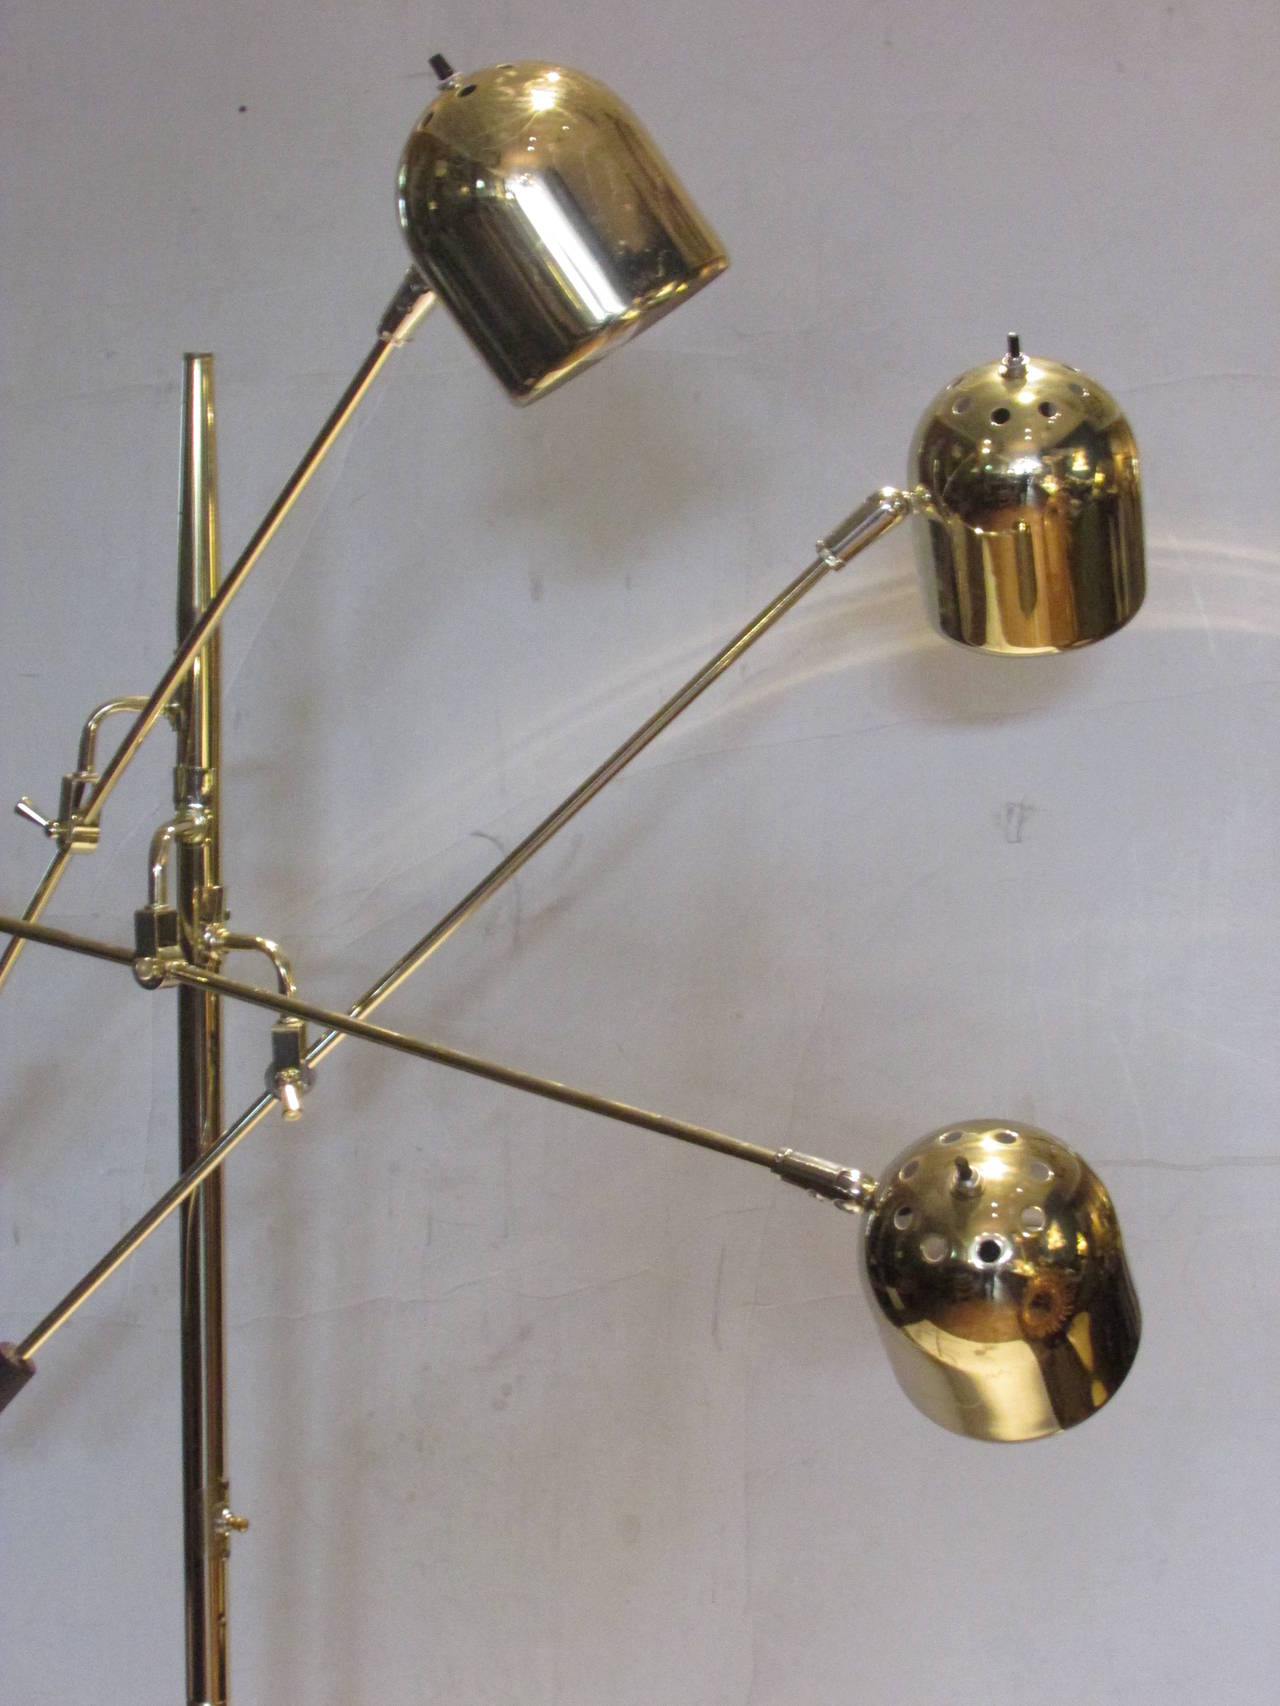 A good quality 1960s Italian modernist marble and brass floor lamp with three articulating armatures - each ending in textured cast metal handles. The pierced brass shades each having independent on / off switches as well as a single on / off switch